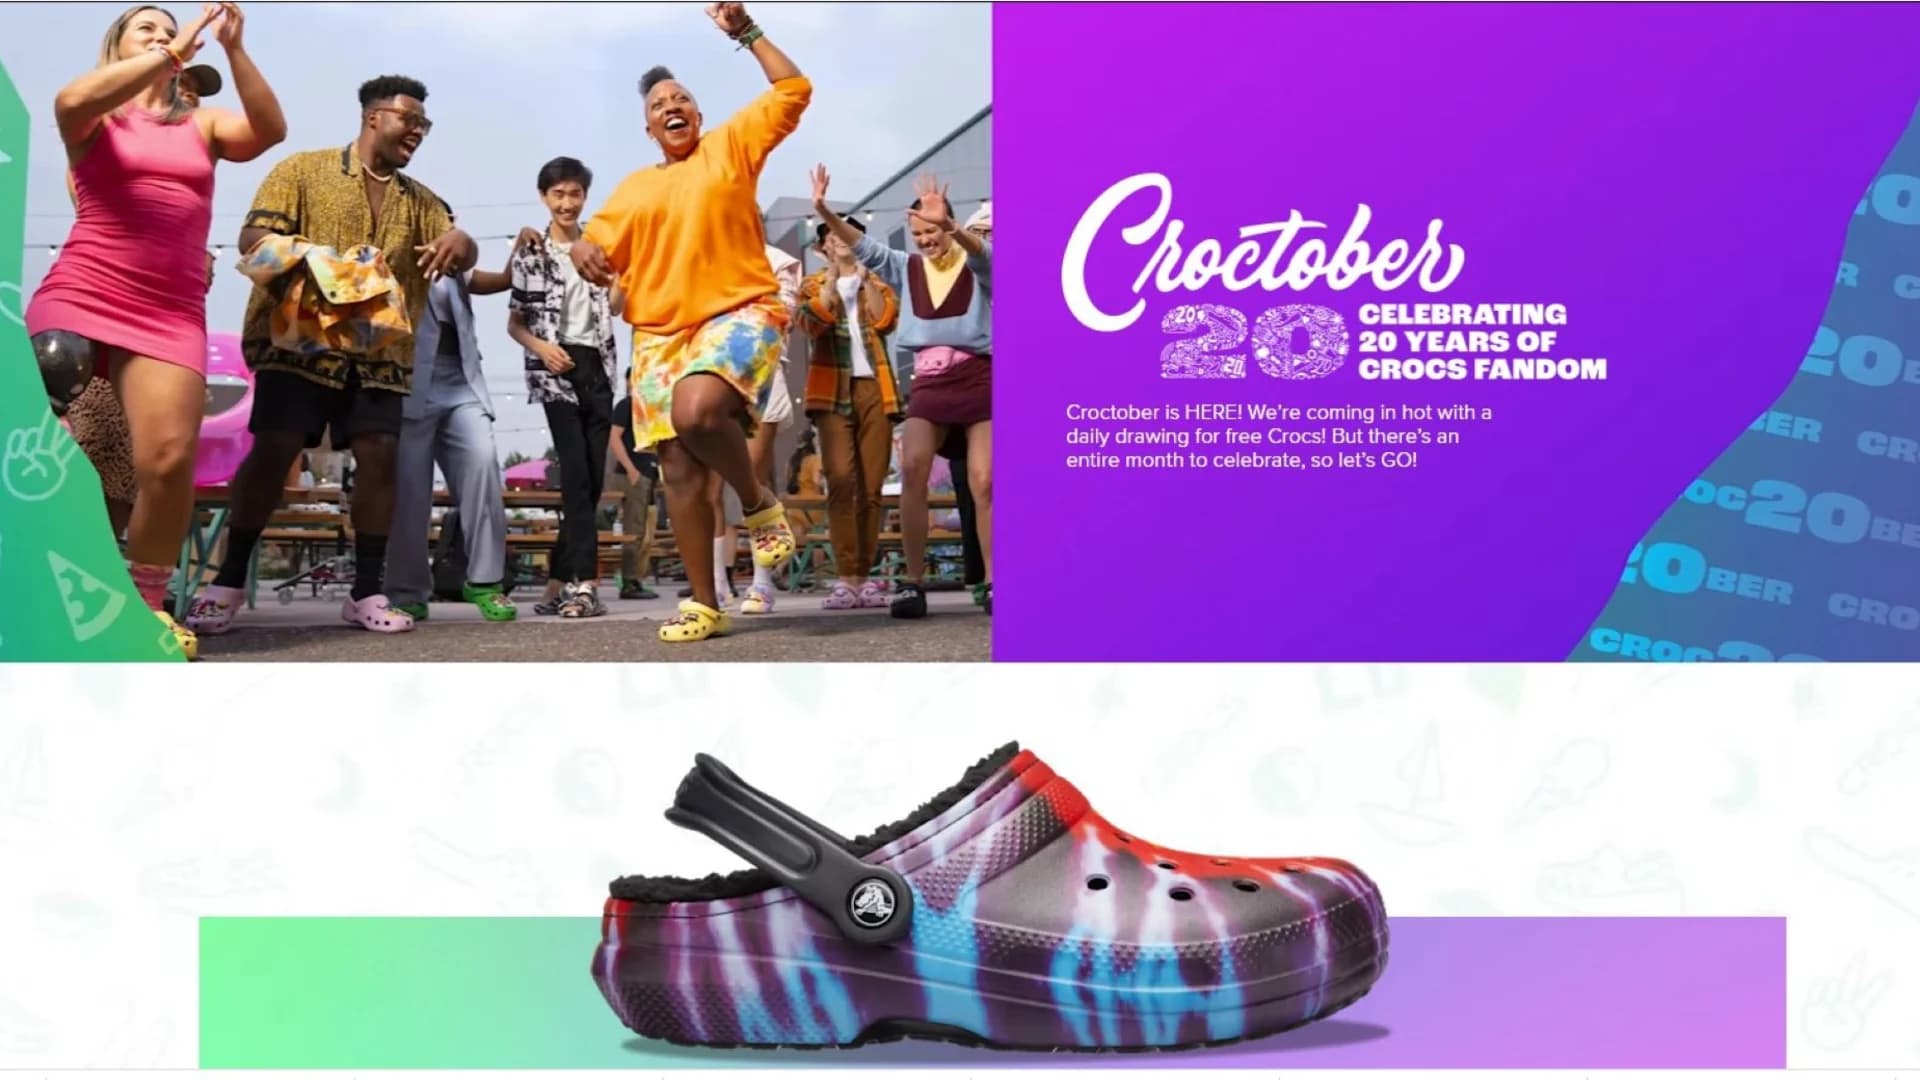 What’s Hot: Crocs celebrating 20th anniversary with 'Croctober' giveaway